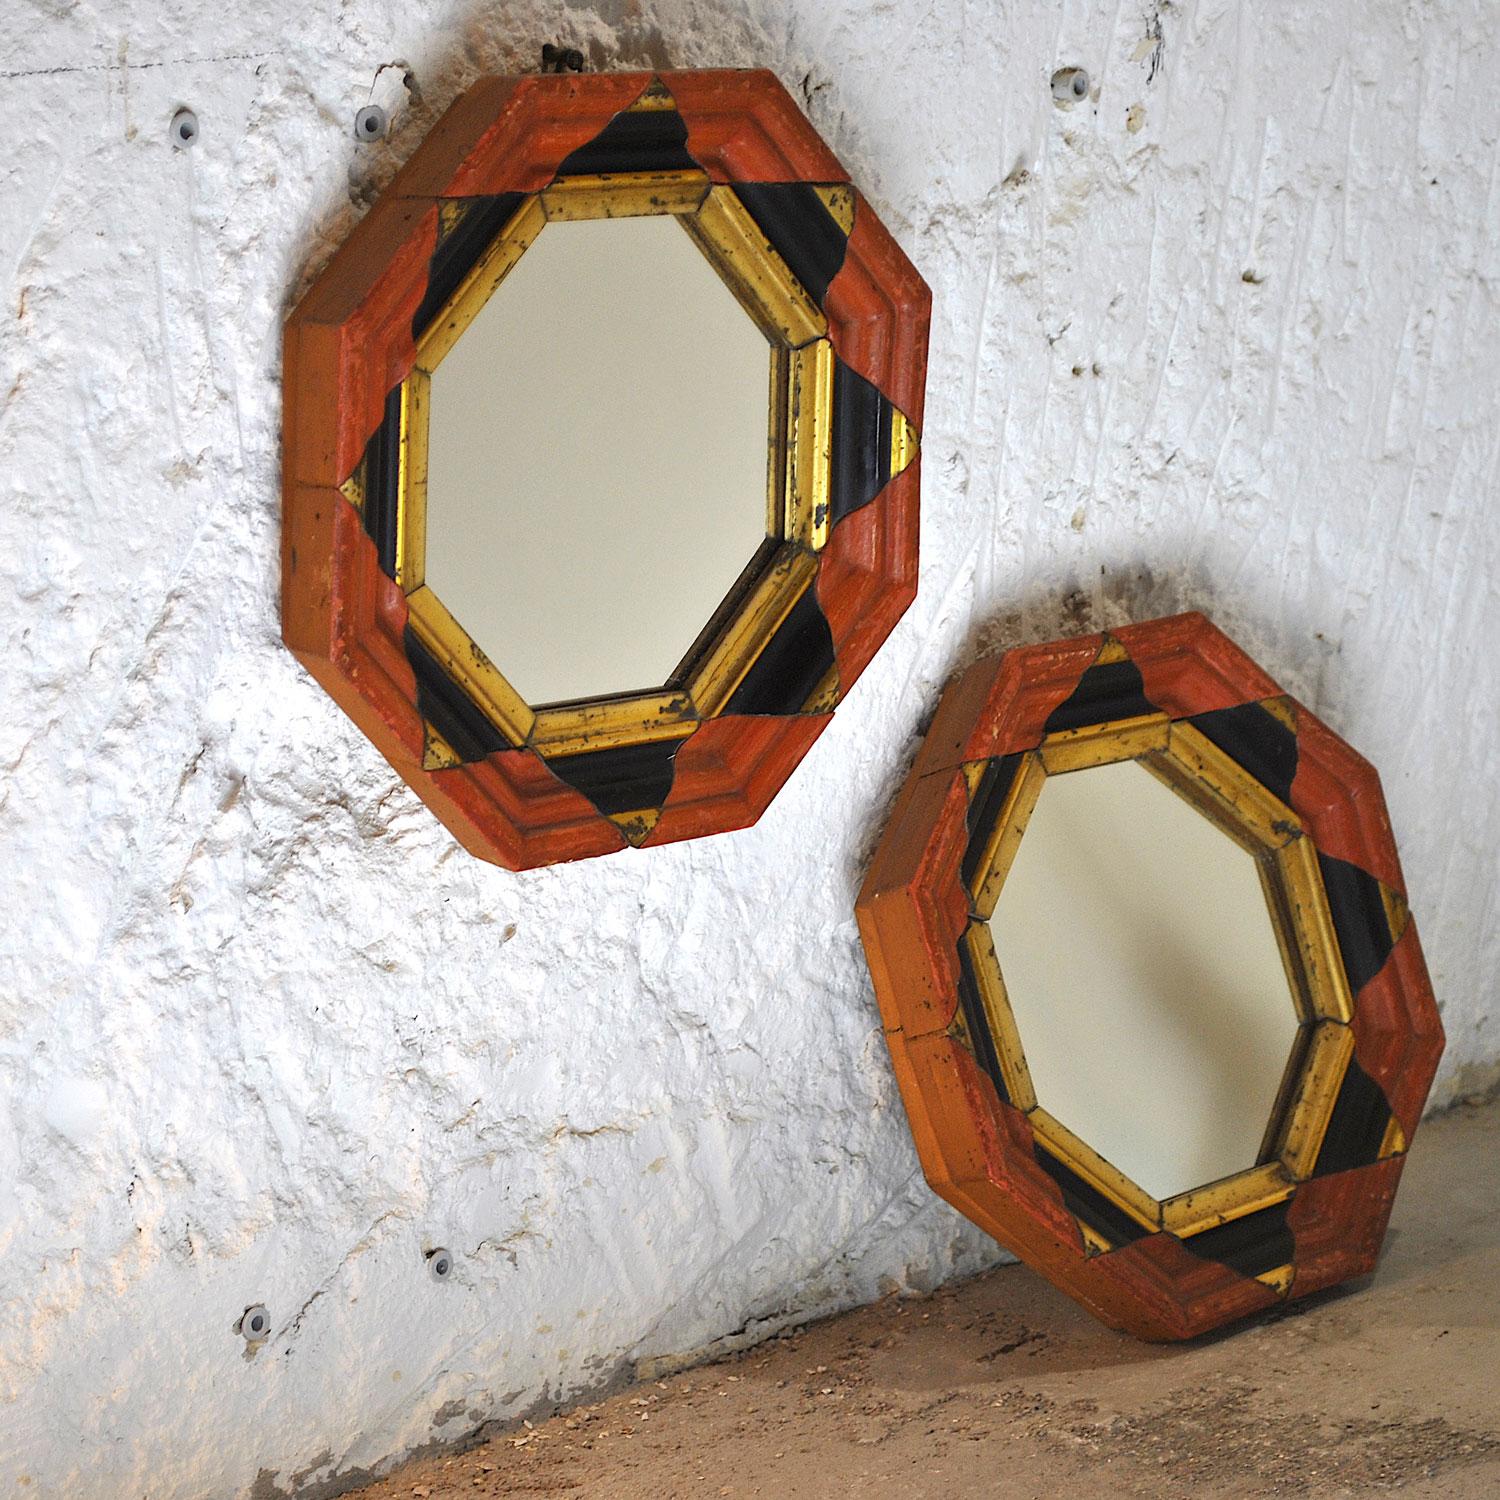 A lovely pair of mirrors with a worked hexagonal frame from the 1960s.